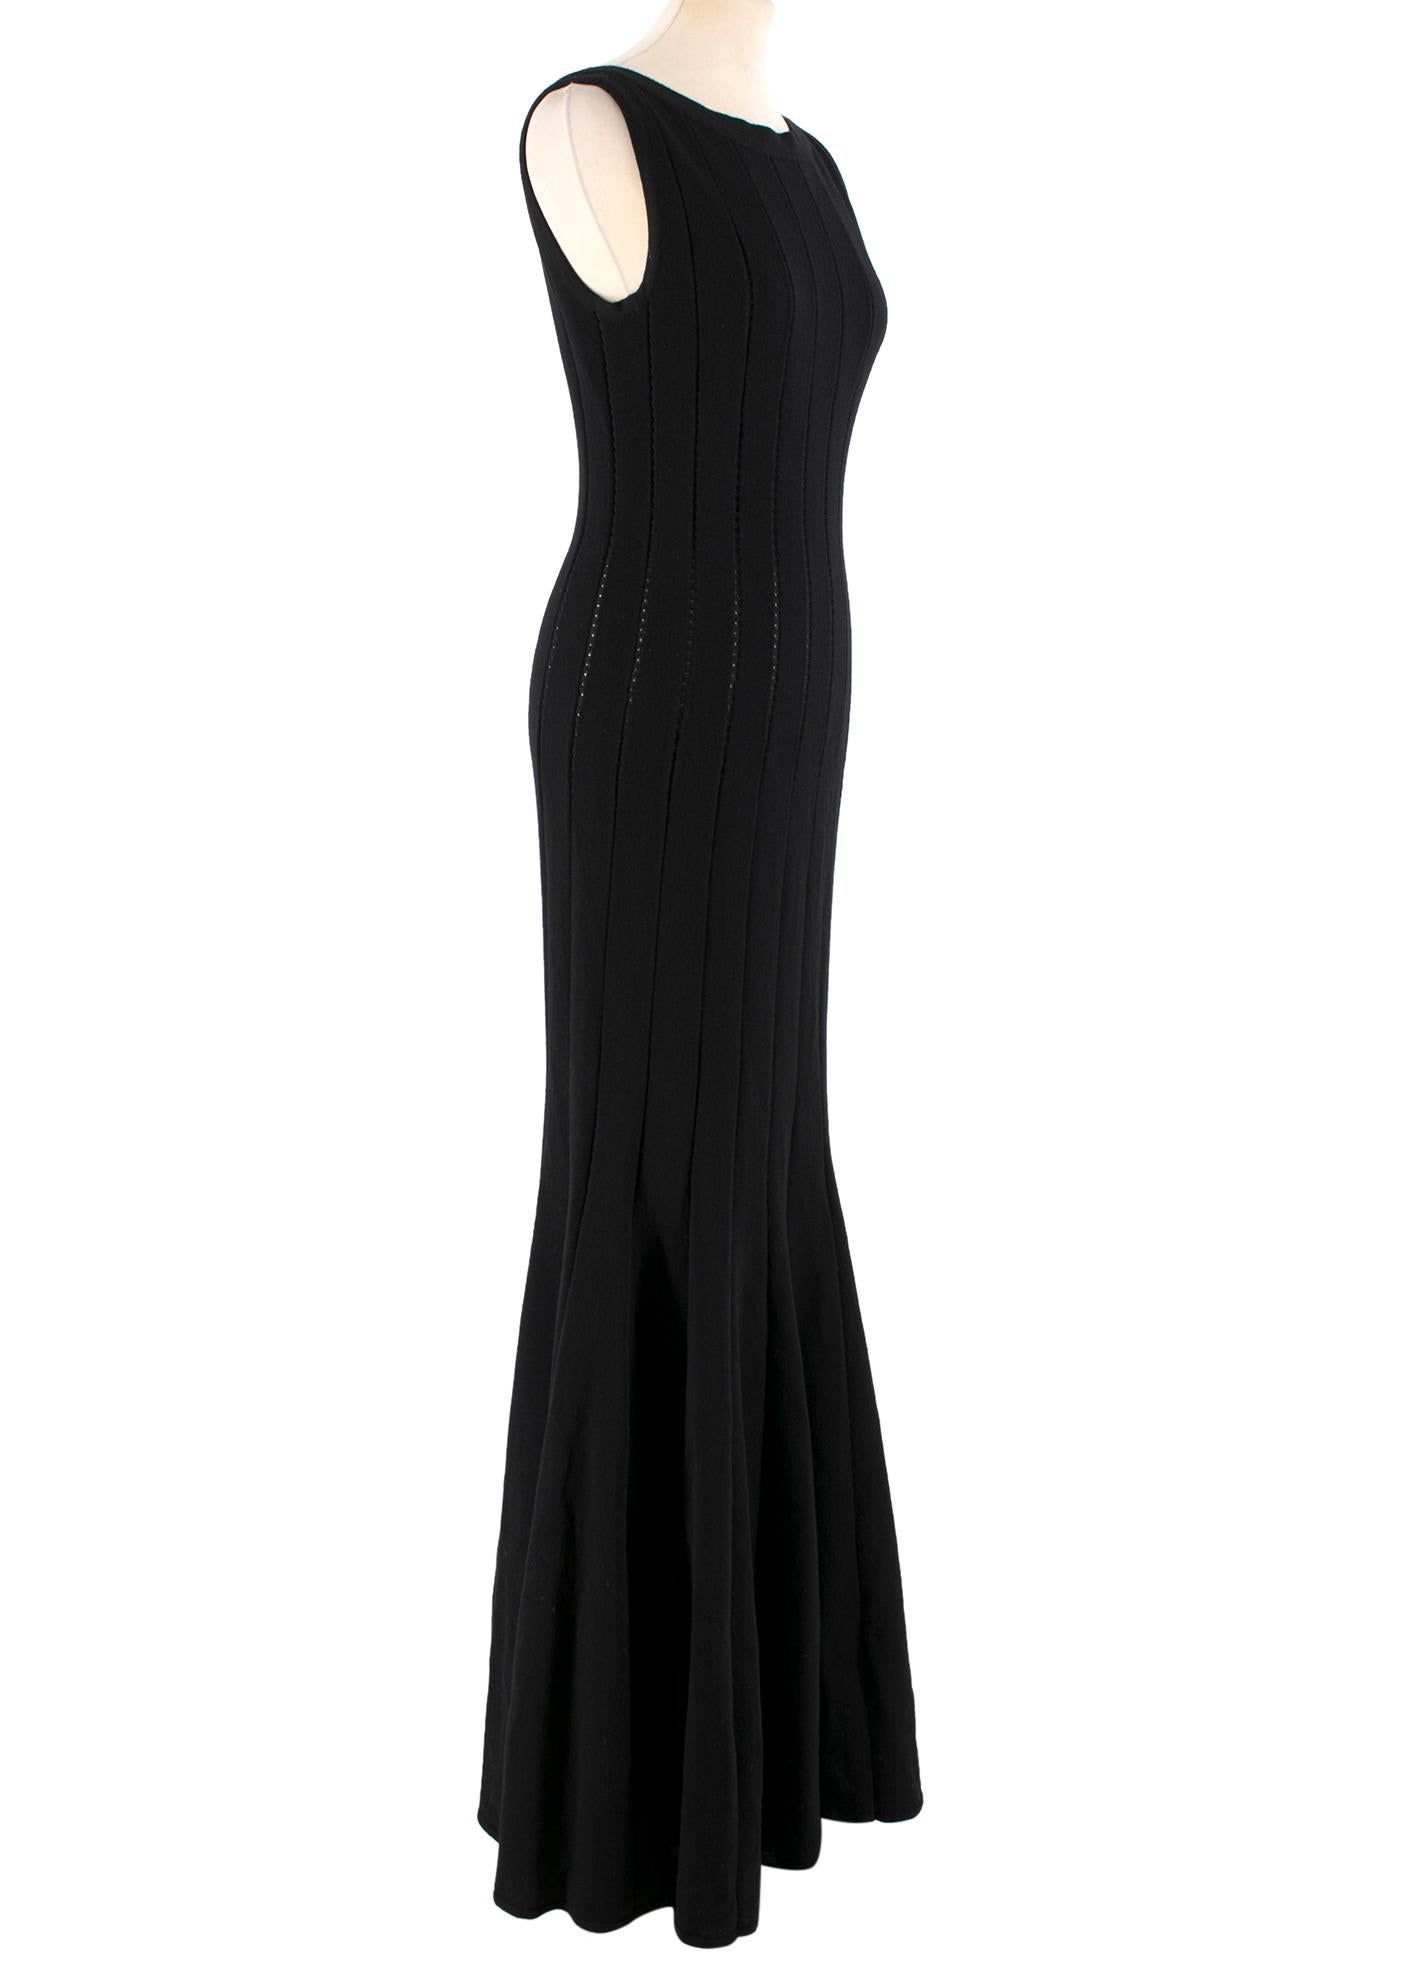 Alaia Black Maxi Fishtail Dress

-Black maxi dress
-Panelled dress with sheer crochet in between
-Sleeveless 
-Wide boat neckline
-Back zip closure

Please note, these items are pre-owned and may show signs of being stored even when unworn and